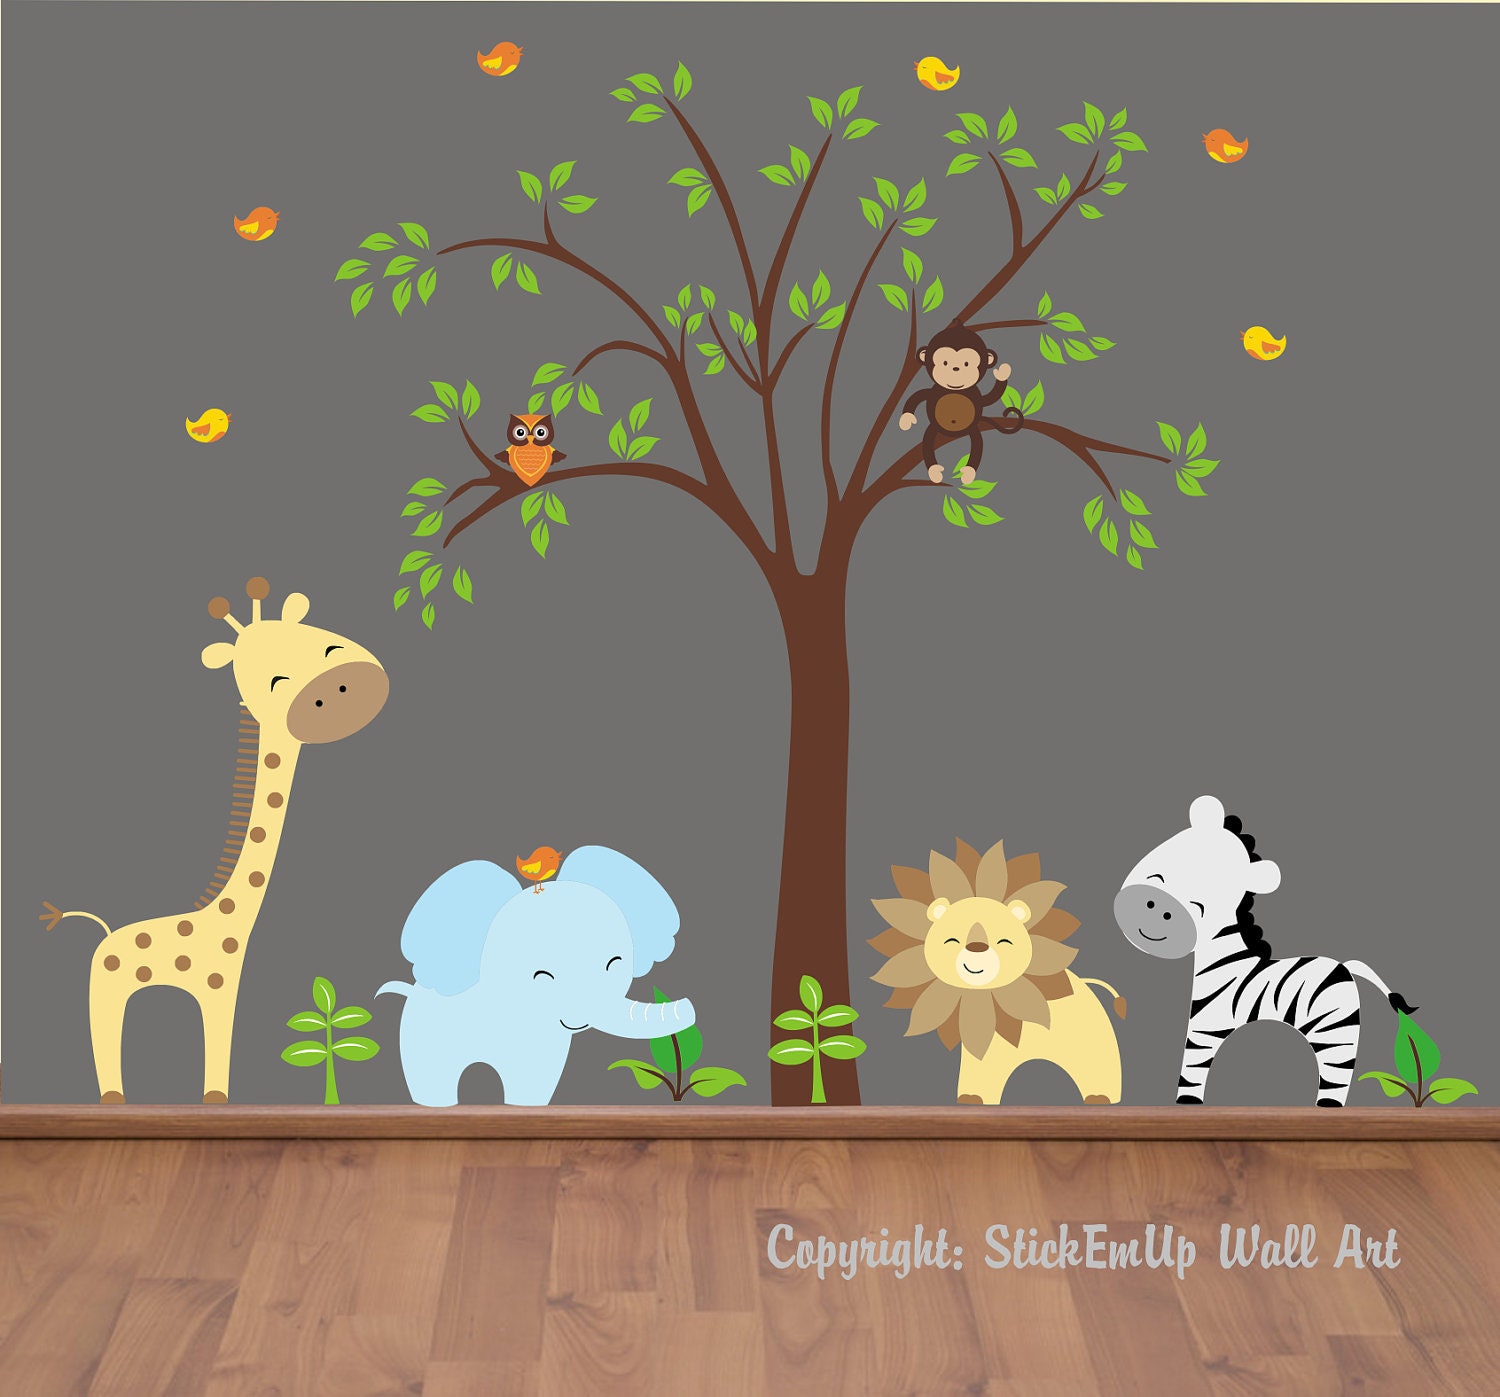 Popular items for wall decals nursery on Etsy